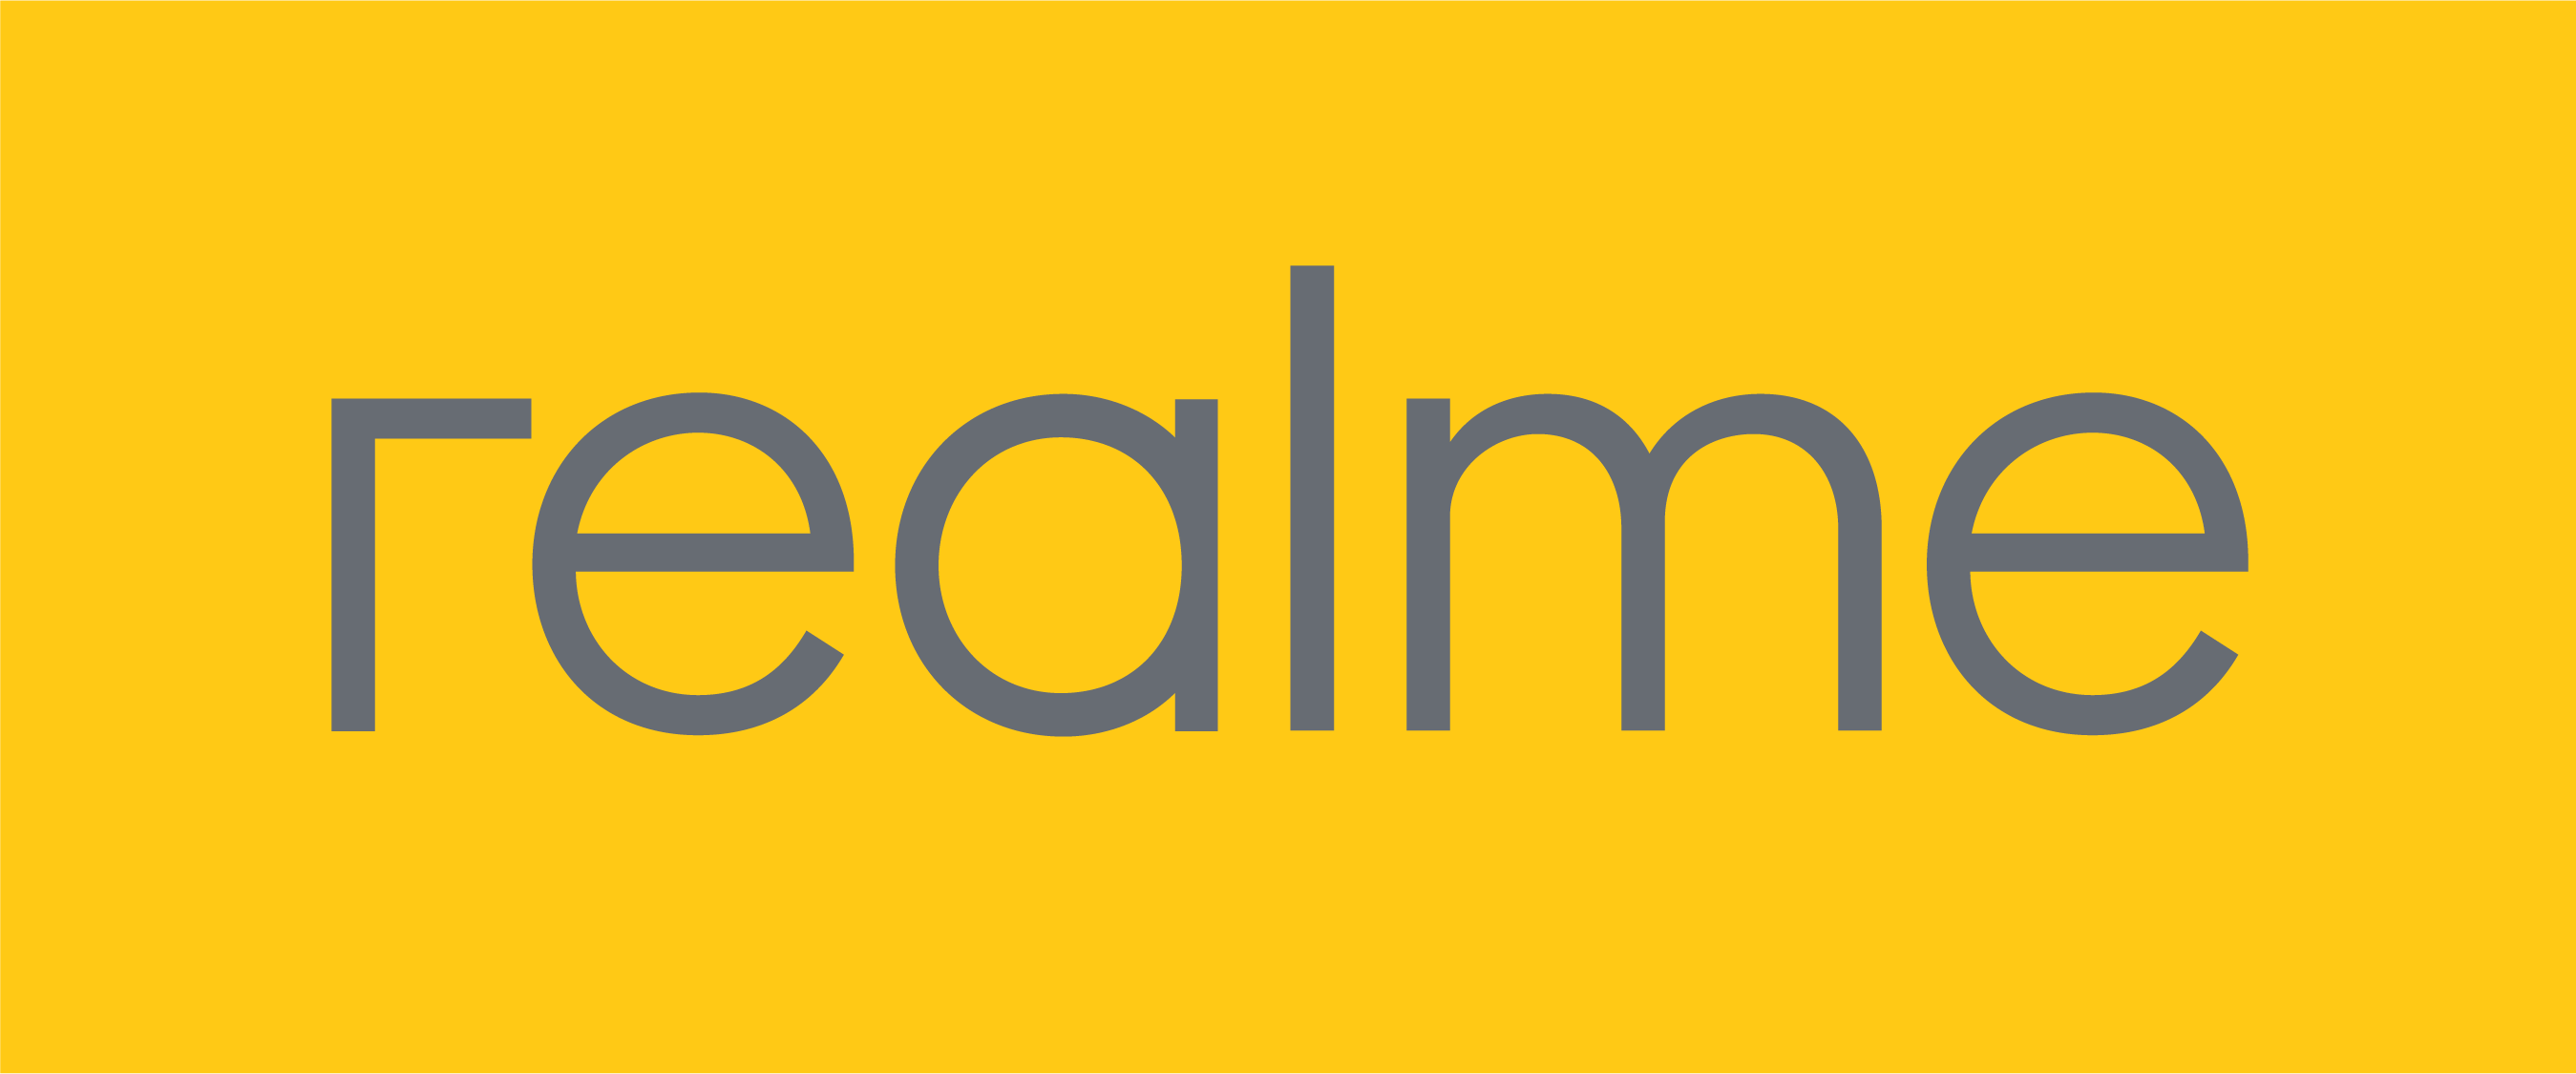 Is Realme planning to launch an online game? Recent survey hints so